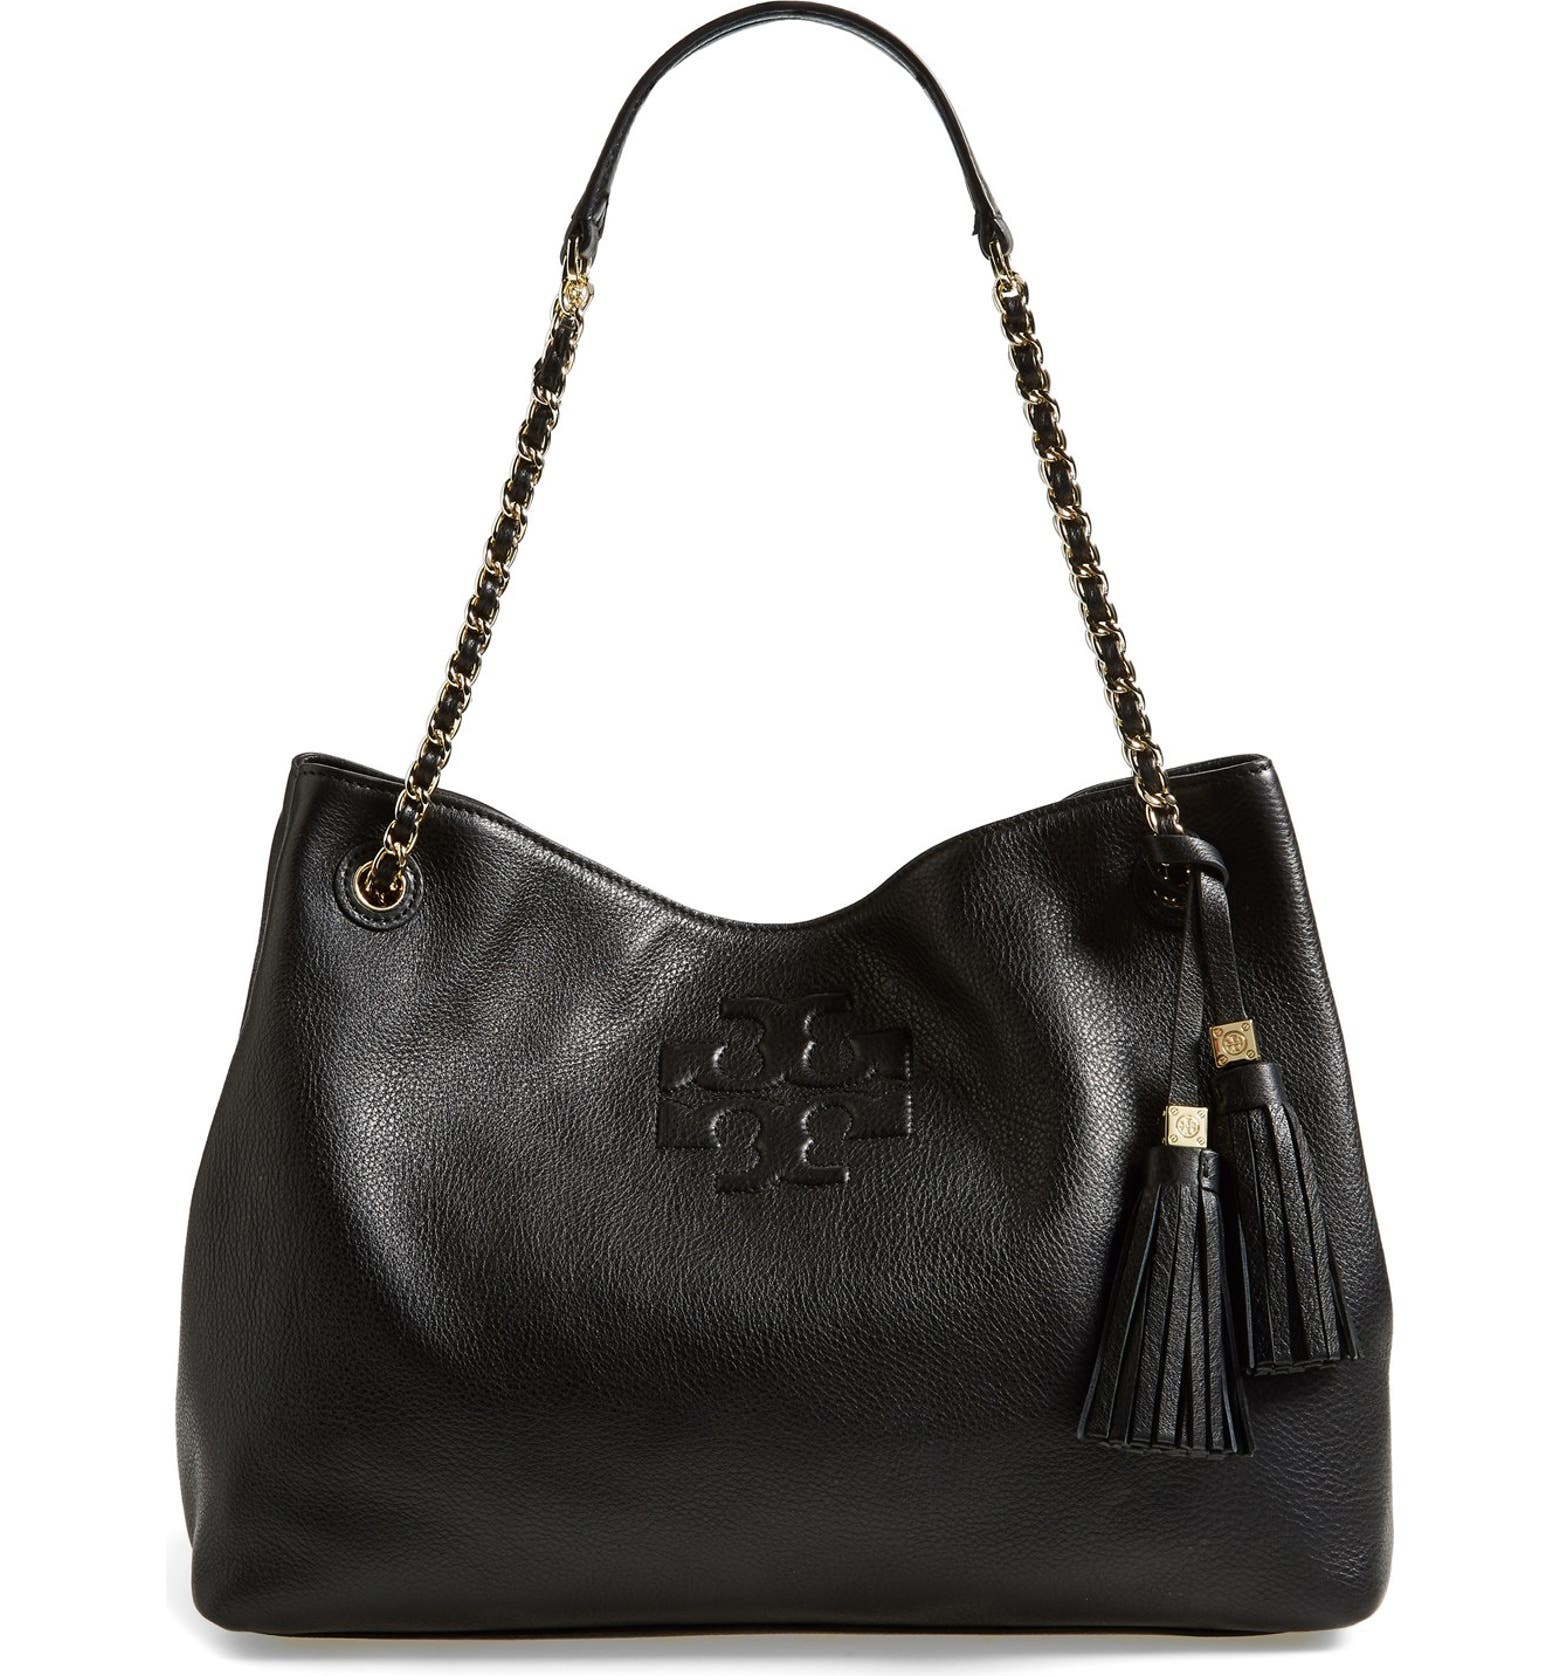 Tory Burch 'Thea' Shoulder Tote | Nordstrom